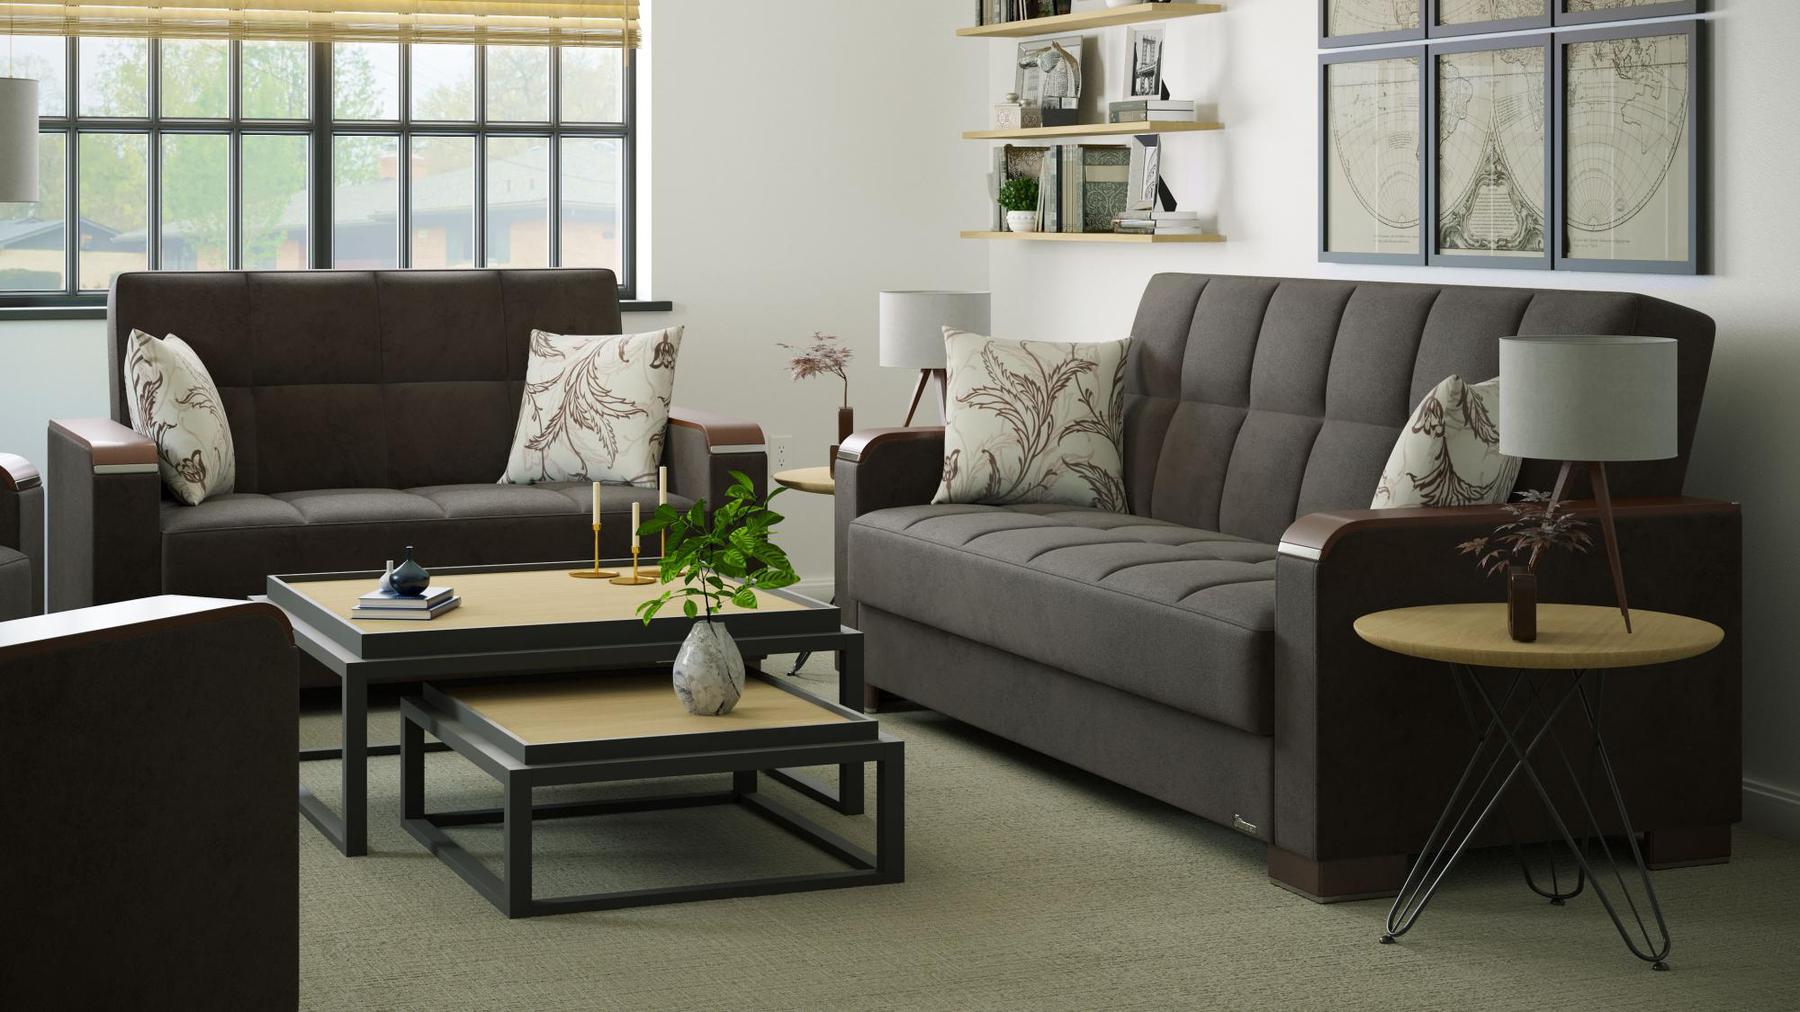 Modern design, Friar Brown , Microfiber upholstered convertible sleeper Loveseat with underseat storage from Voyage Luxe by Ottomanson in living room lifestyle setting with another piece of furniture. This Loveseat measures 67 inches width by 36 inches depth by 41 inches height.